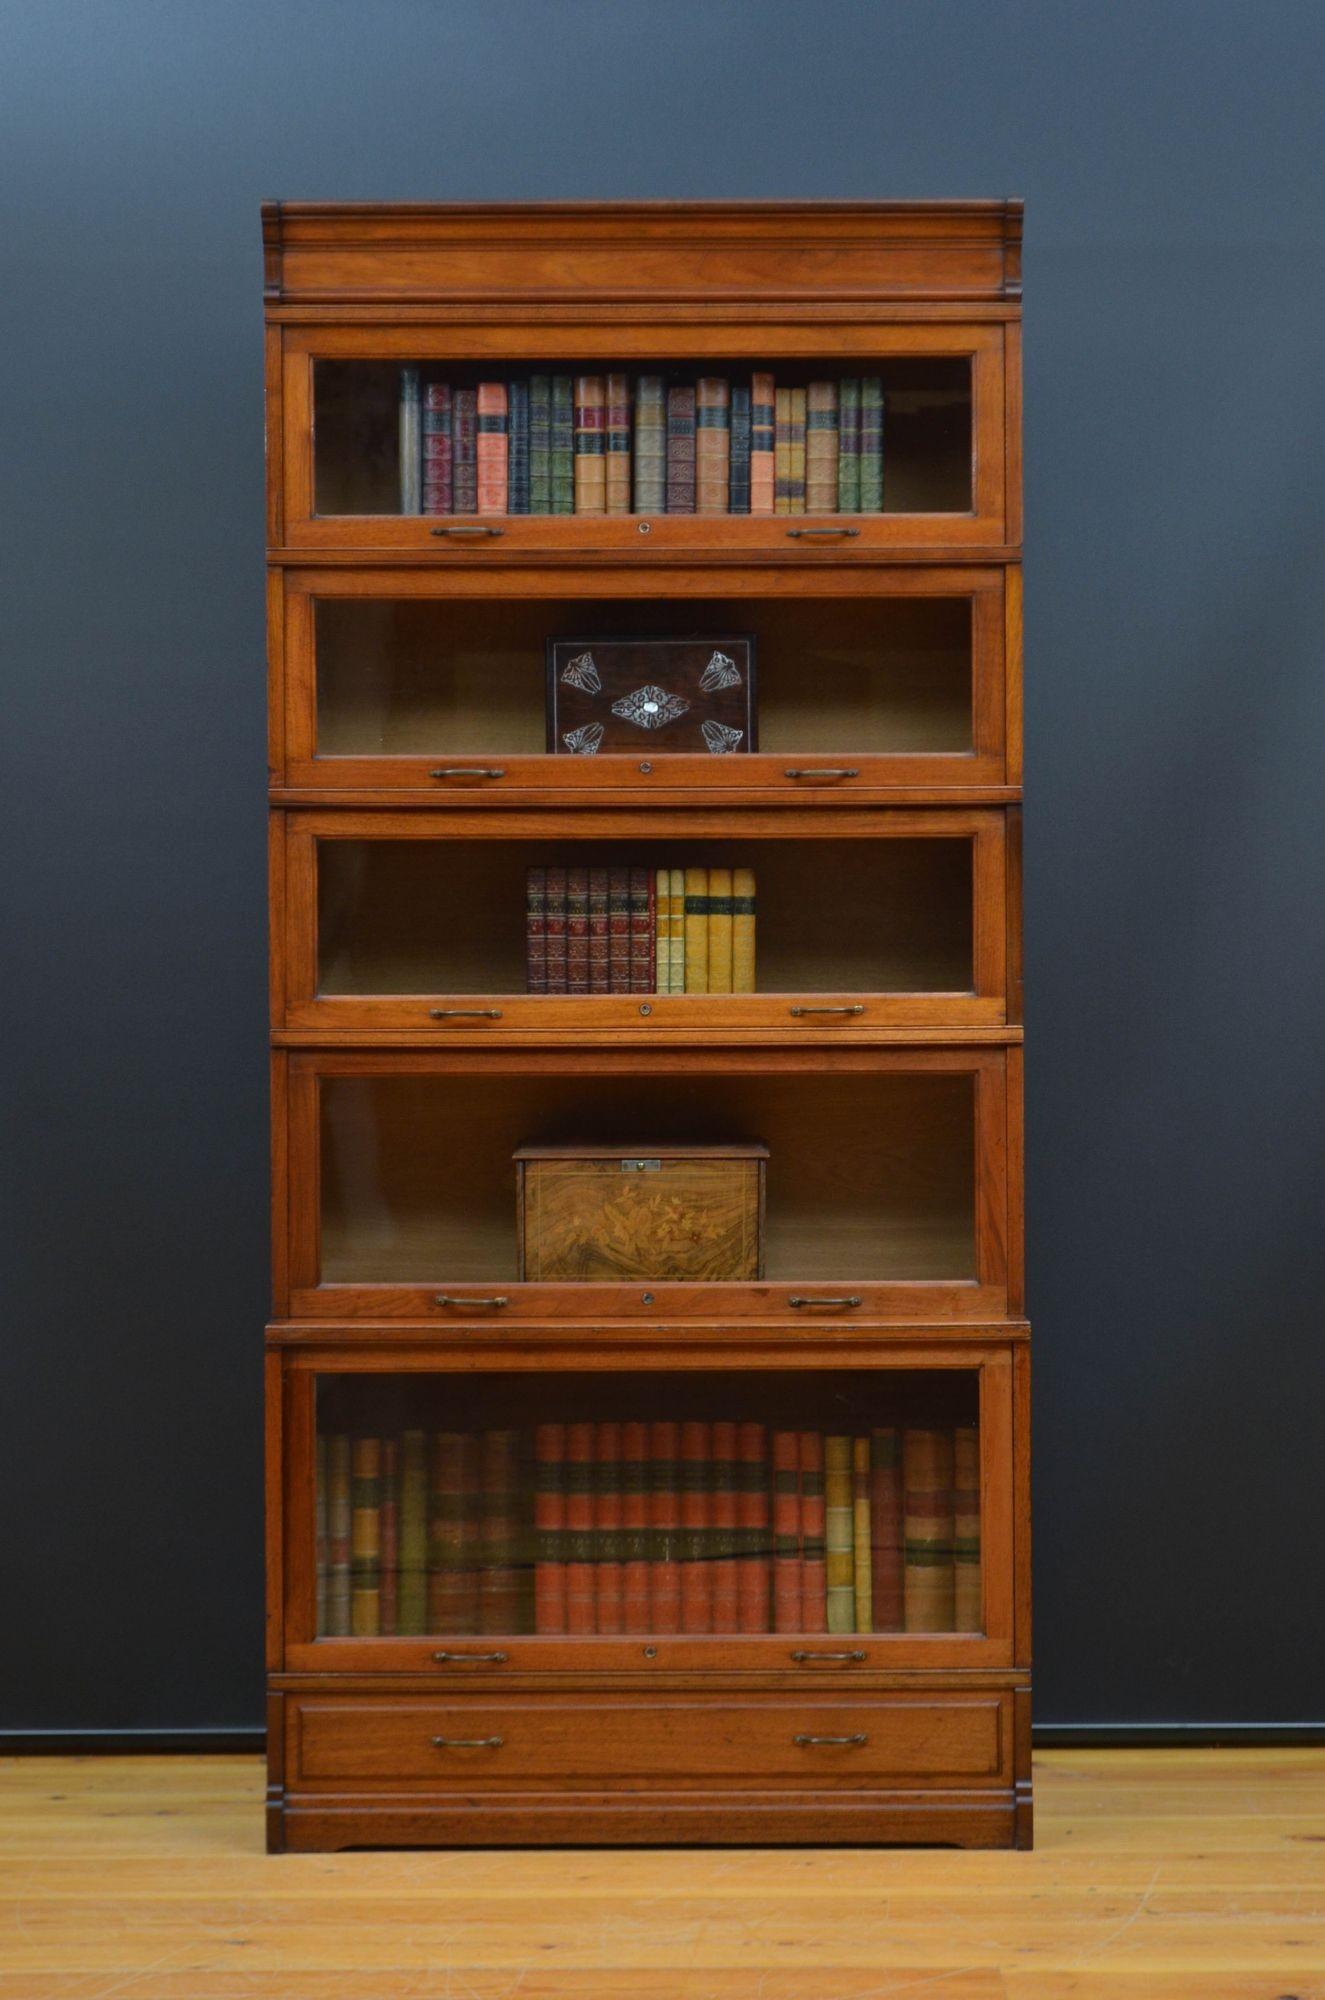 Sn5548 Fine quality solid walnut and solid oak five section stacking bookcase, having five graduated sections fitted with locking mechanism, original brass handles and original glass above an oak line fielded base drawer. This antique bookcase